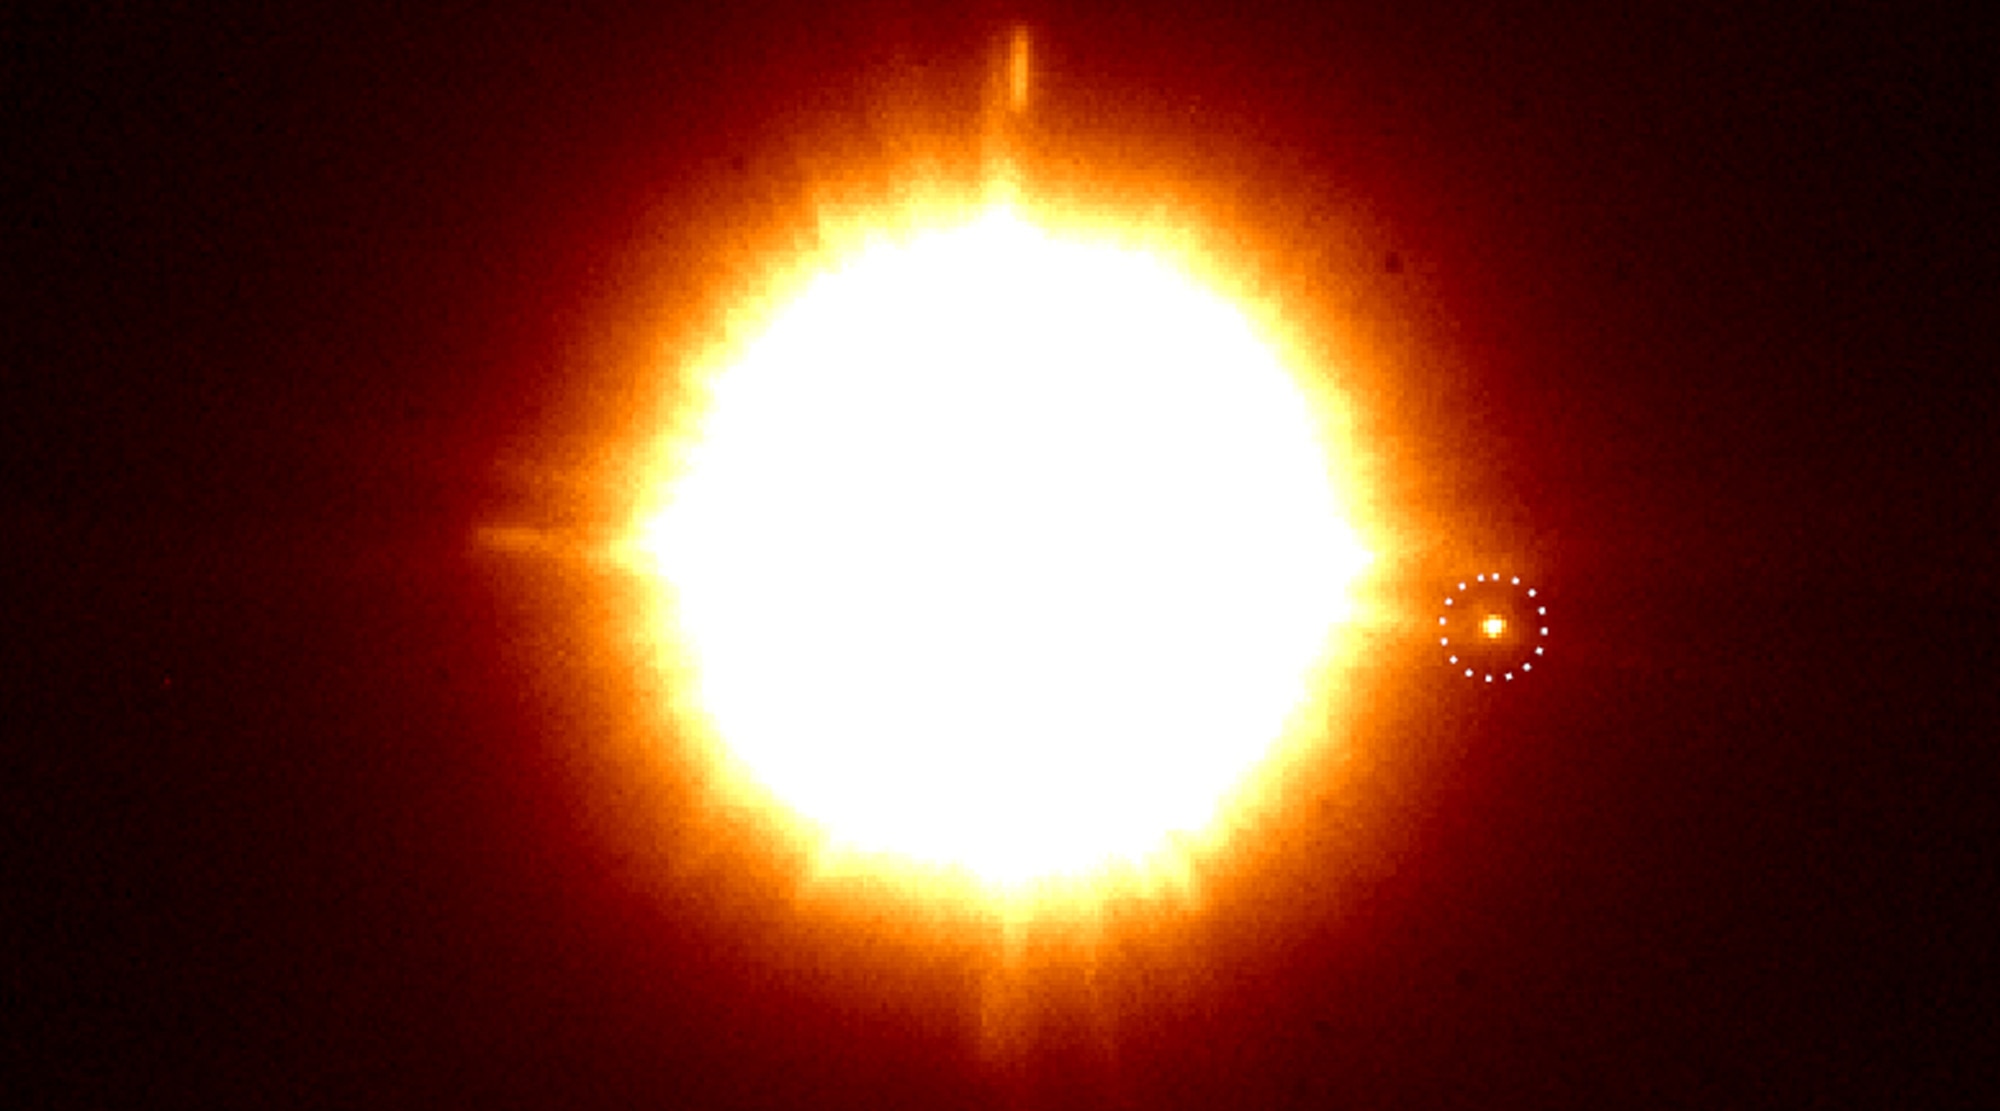 The binary star CS Cha (appearing as one star here due to their tight orbit) has a companion. But what is it? Credit: C. Ginski and SPHERE